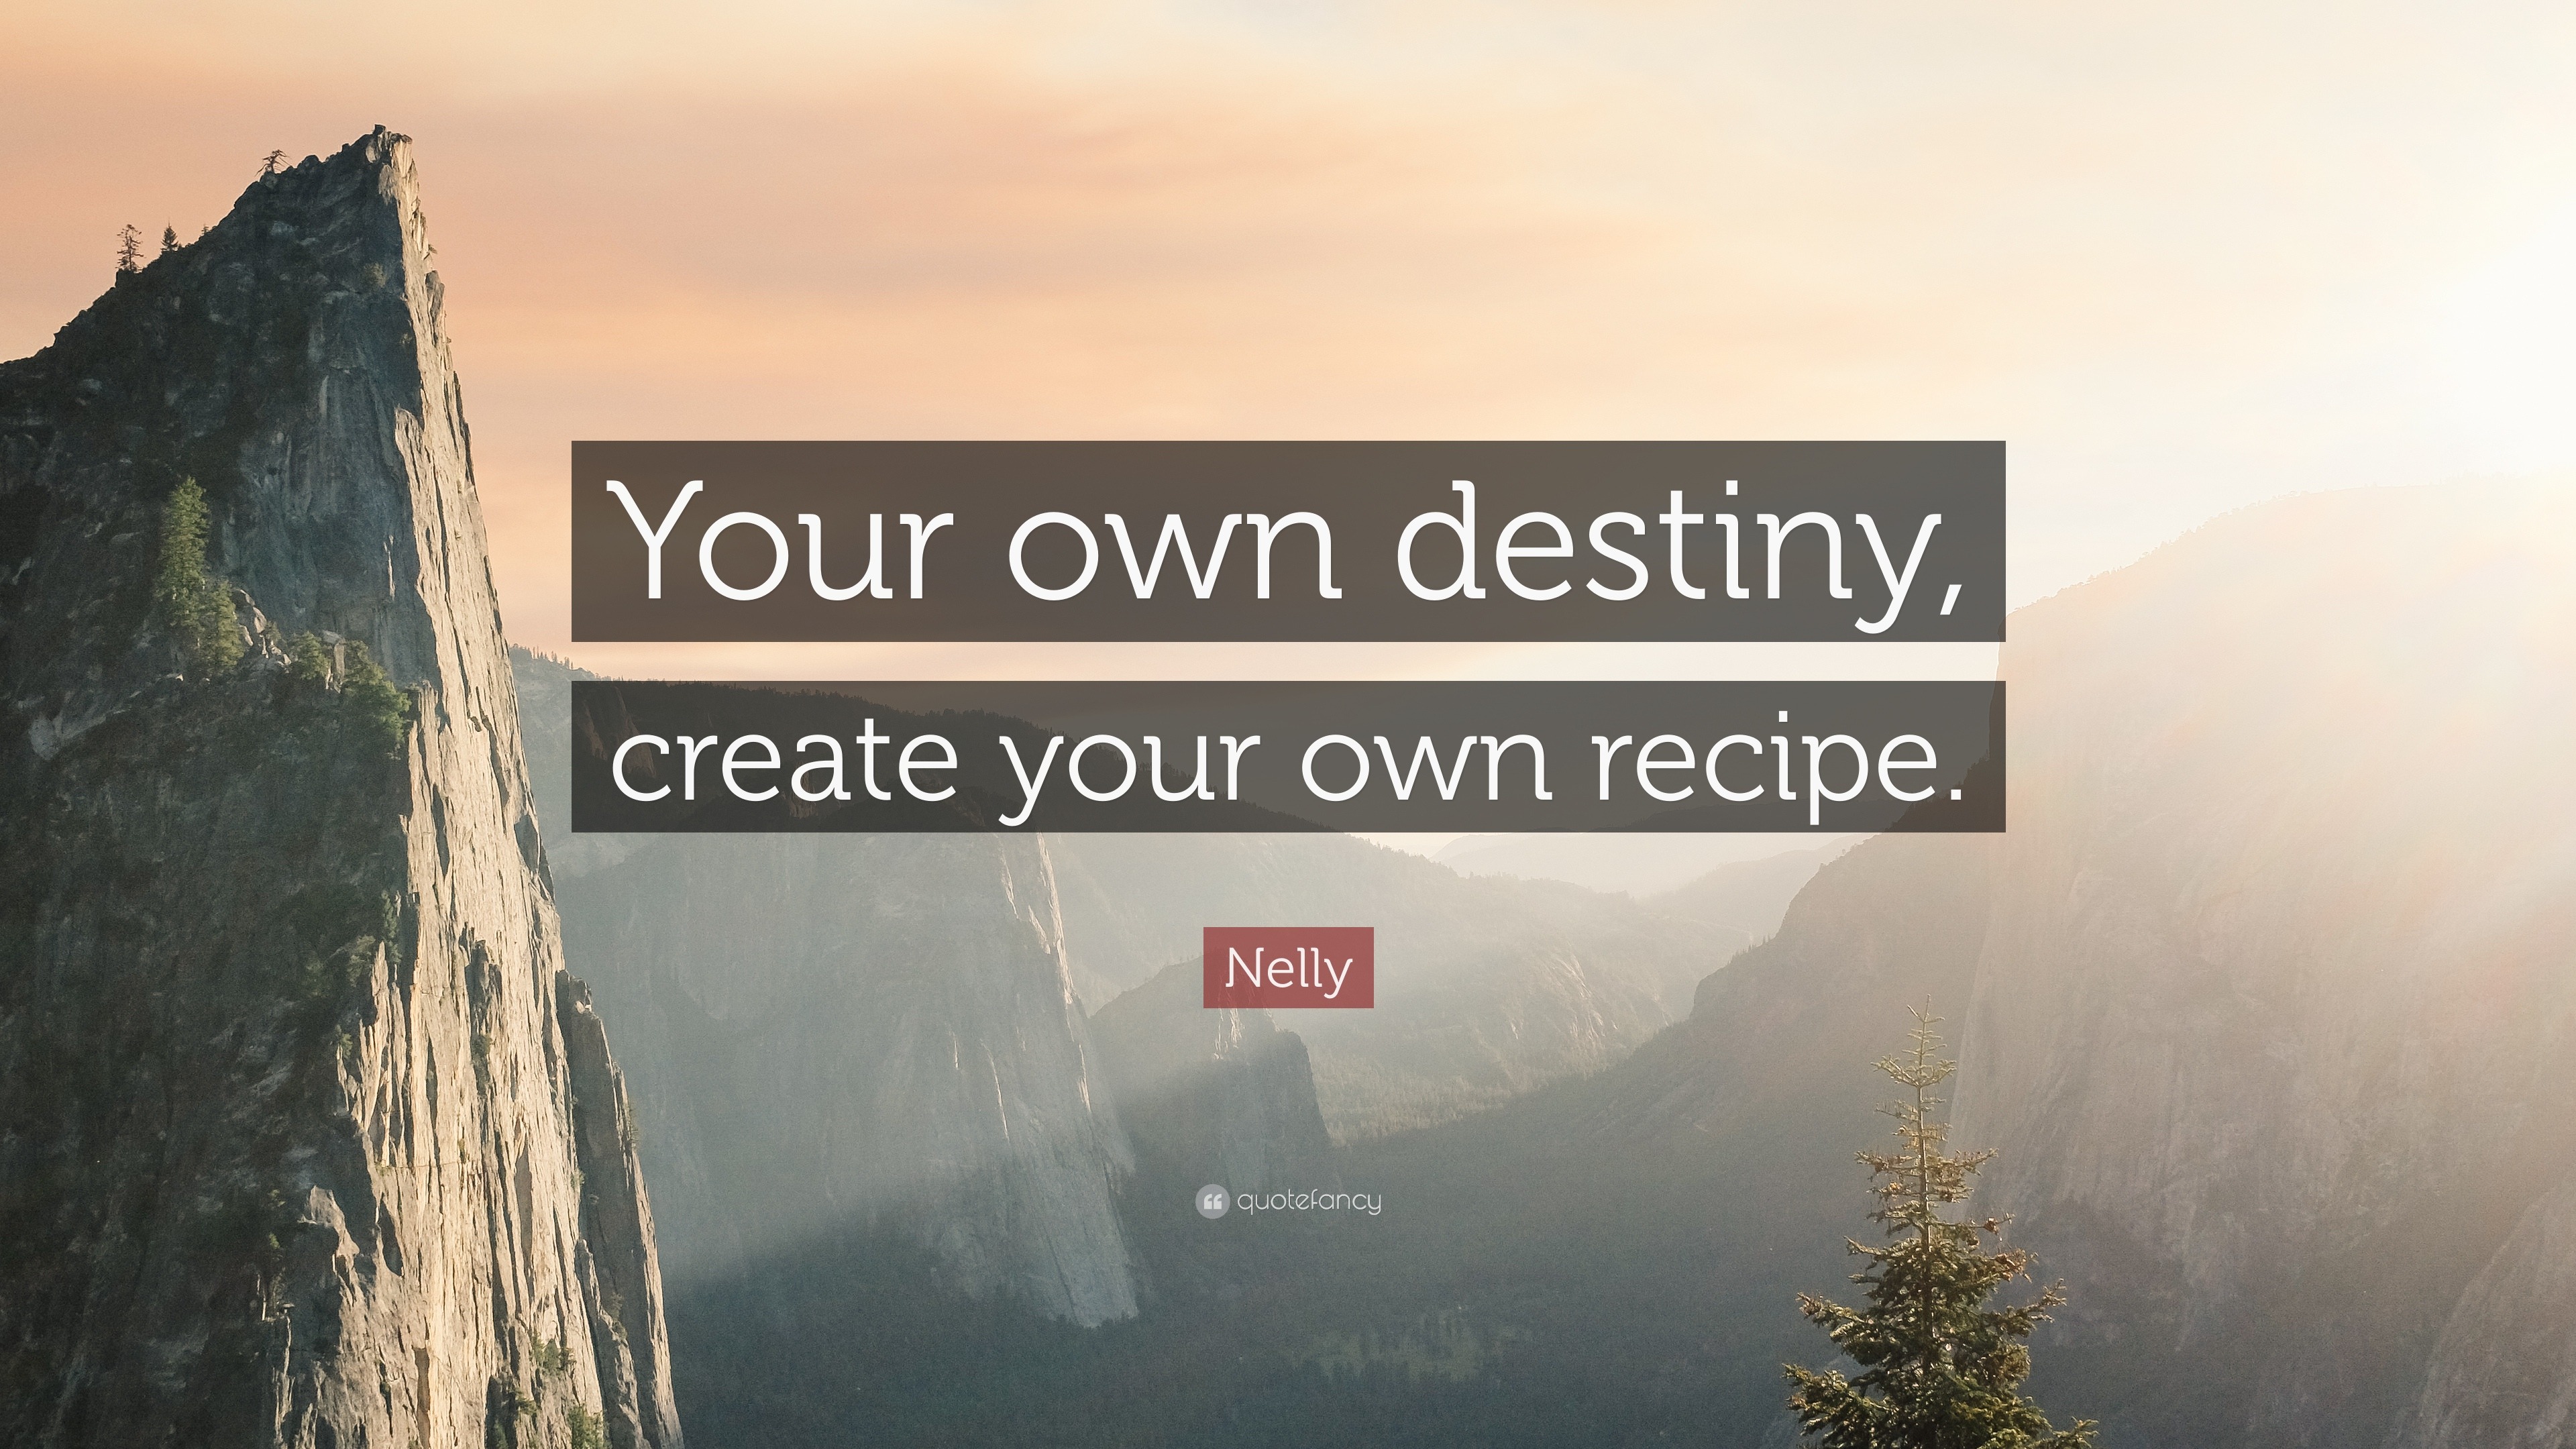 Nelly Quote: “Your own destiny, create your own recipe.”